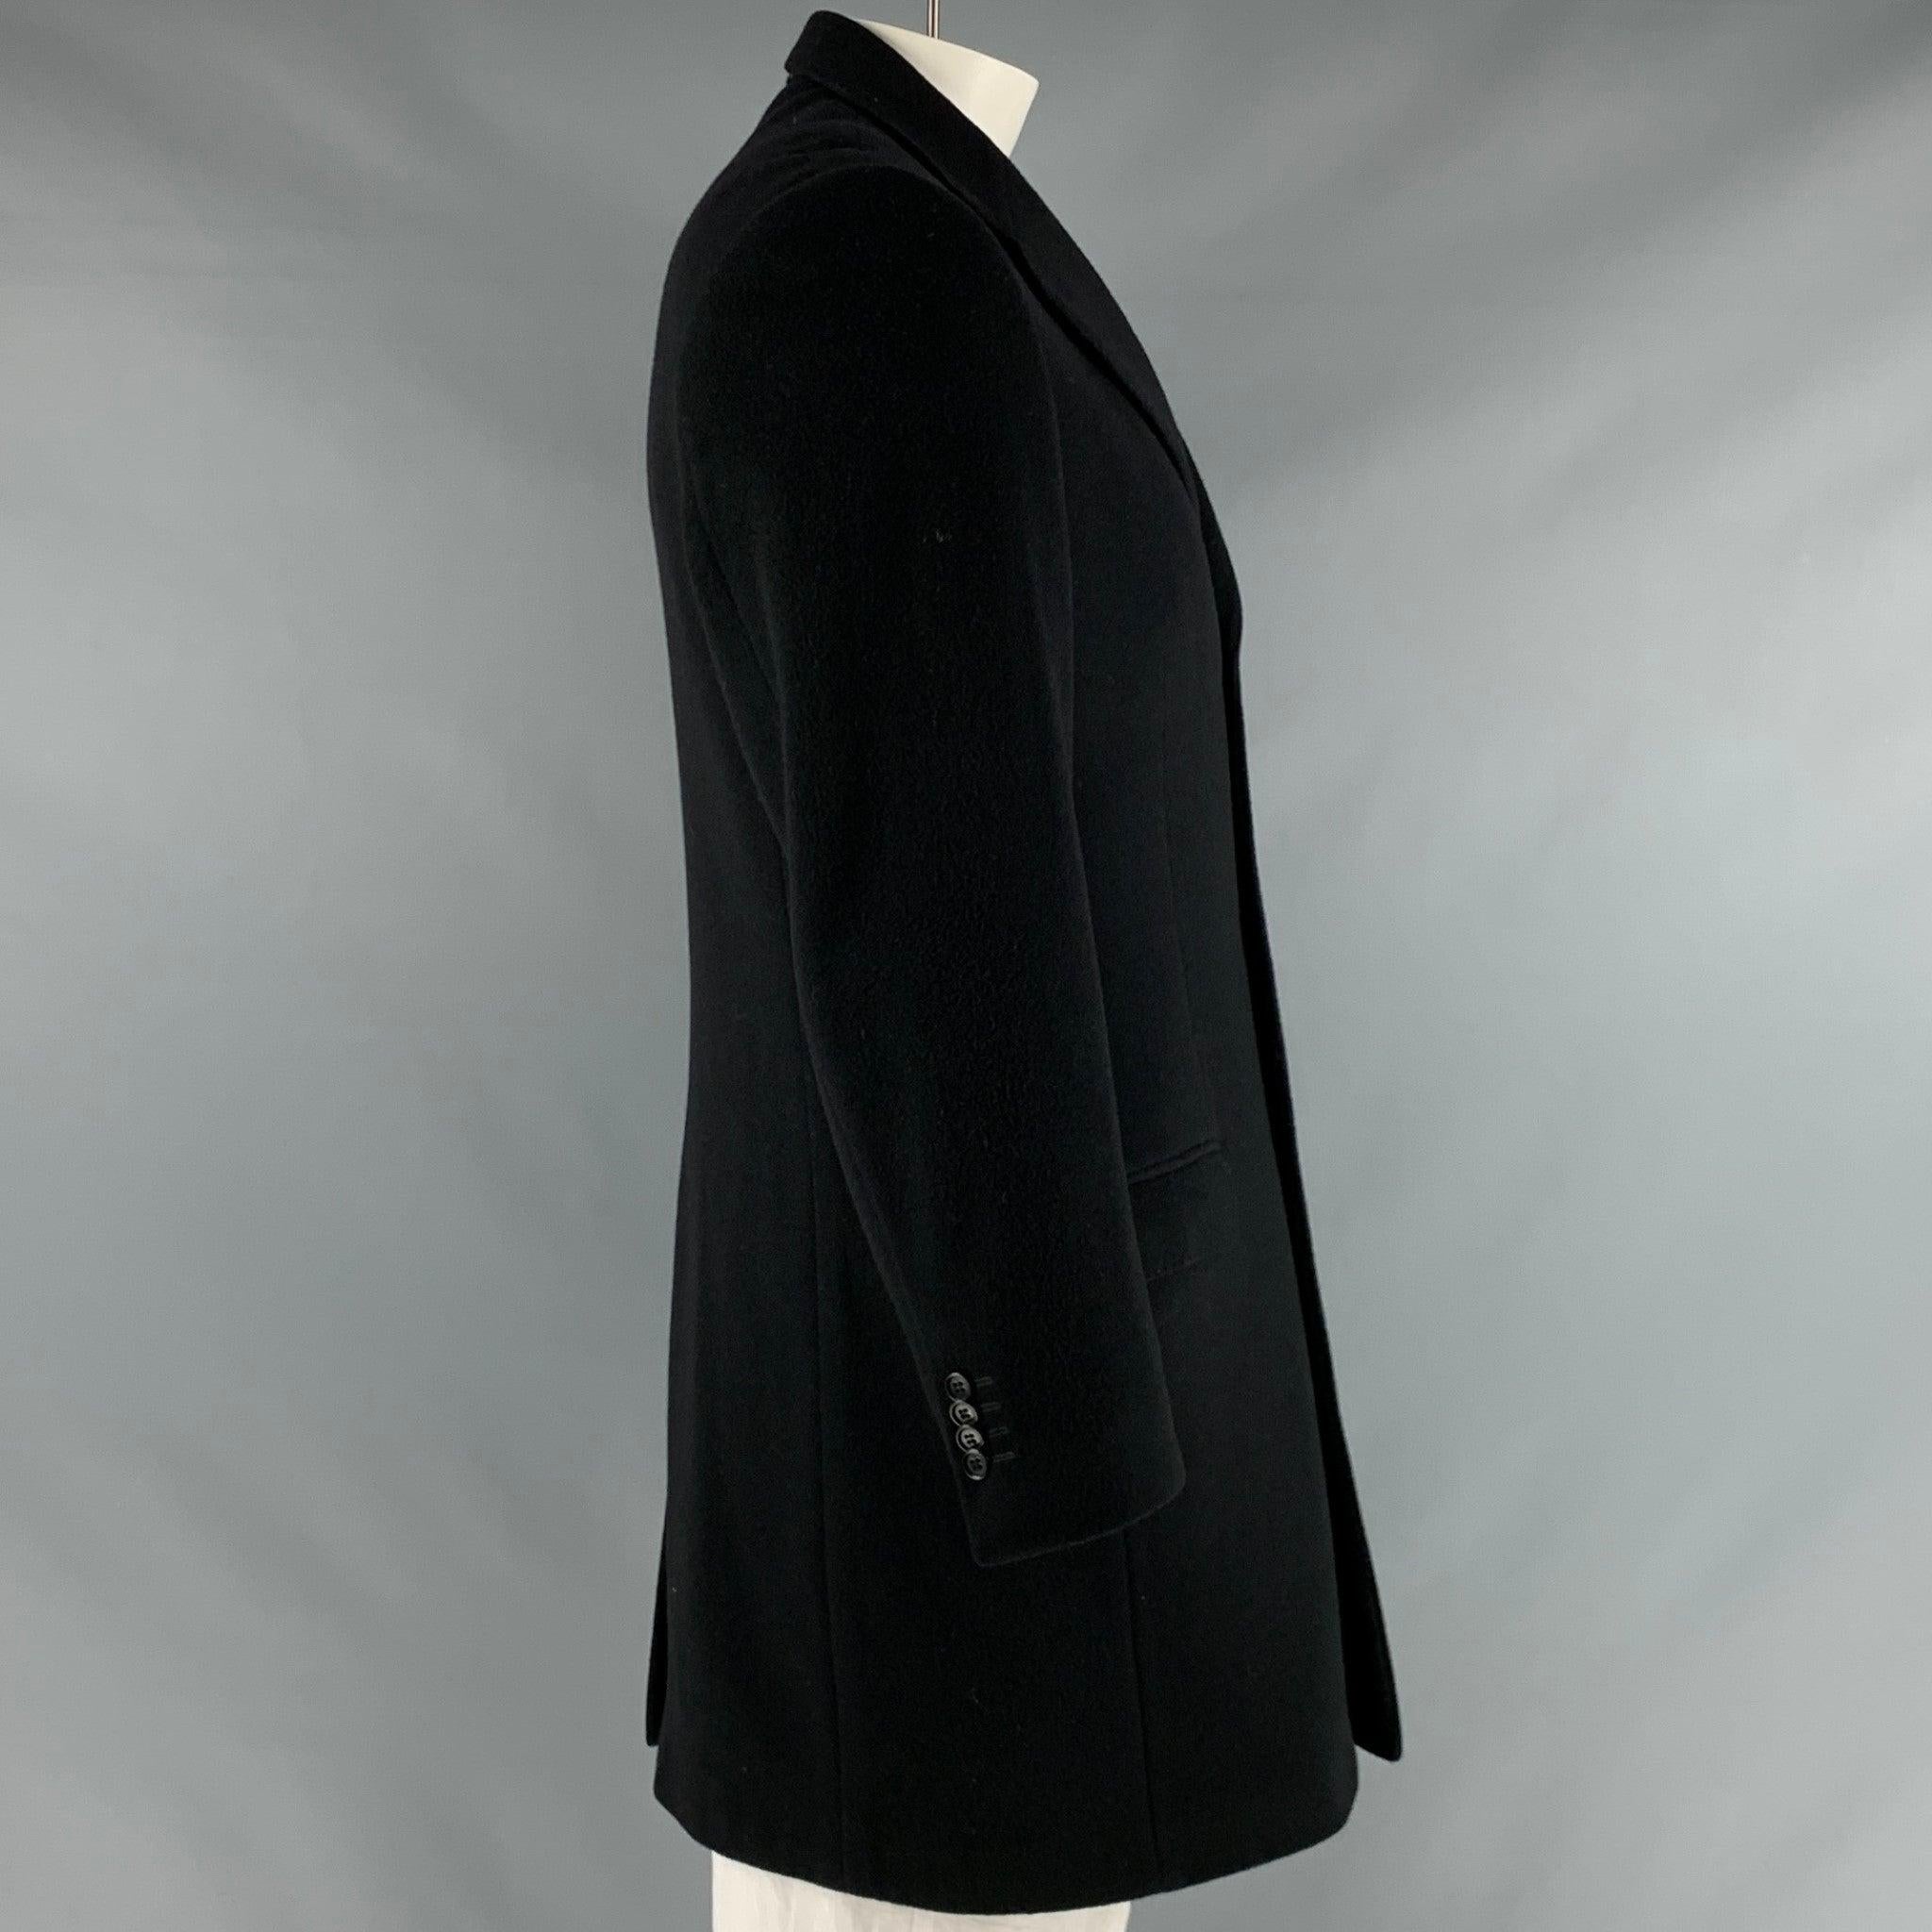 YVES SAINT LAURENT coat
in
a black wool blend fabric featuring a single breasted style, three pockets, and a four button closure.Good Pre-Owned Condition. 

Marked:   IT 52 

Measurements: 
 
Shoulder: 19 inches Chest: 42 inches Sleeve: 24 inches